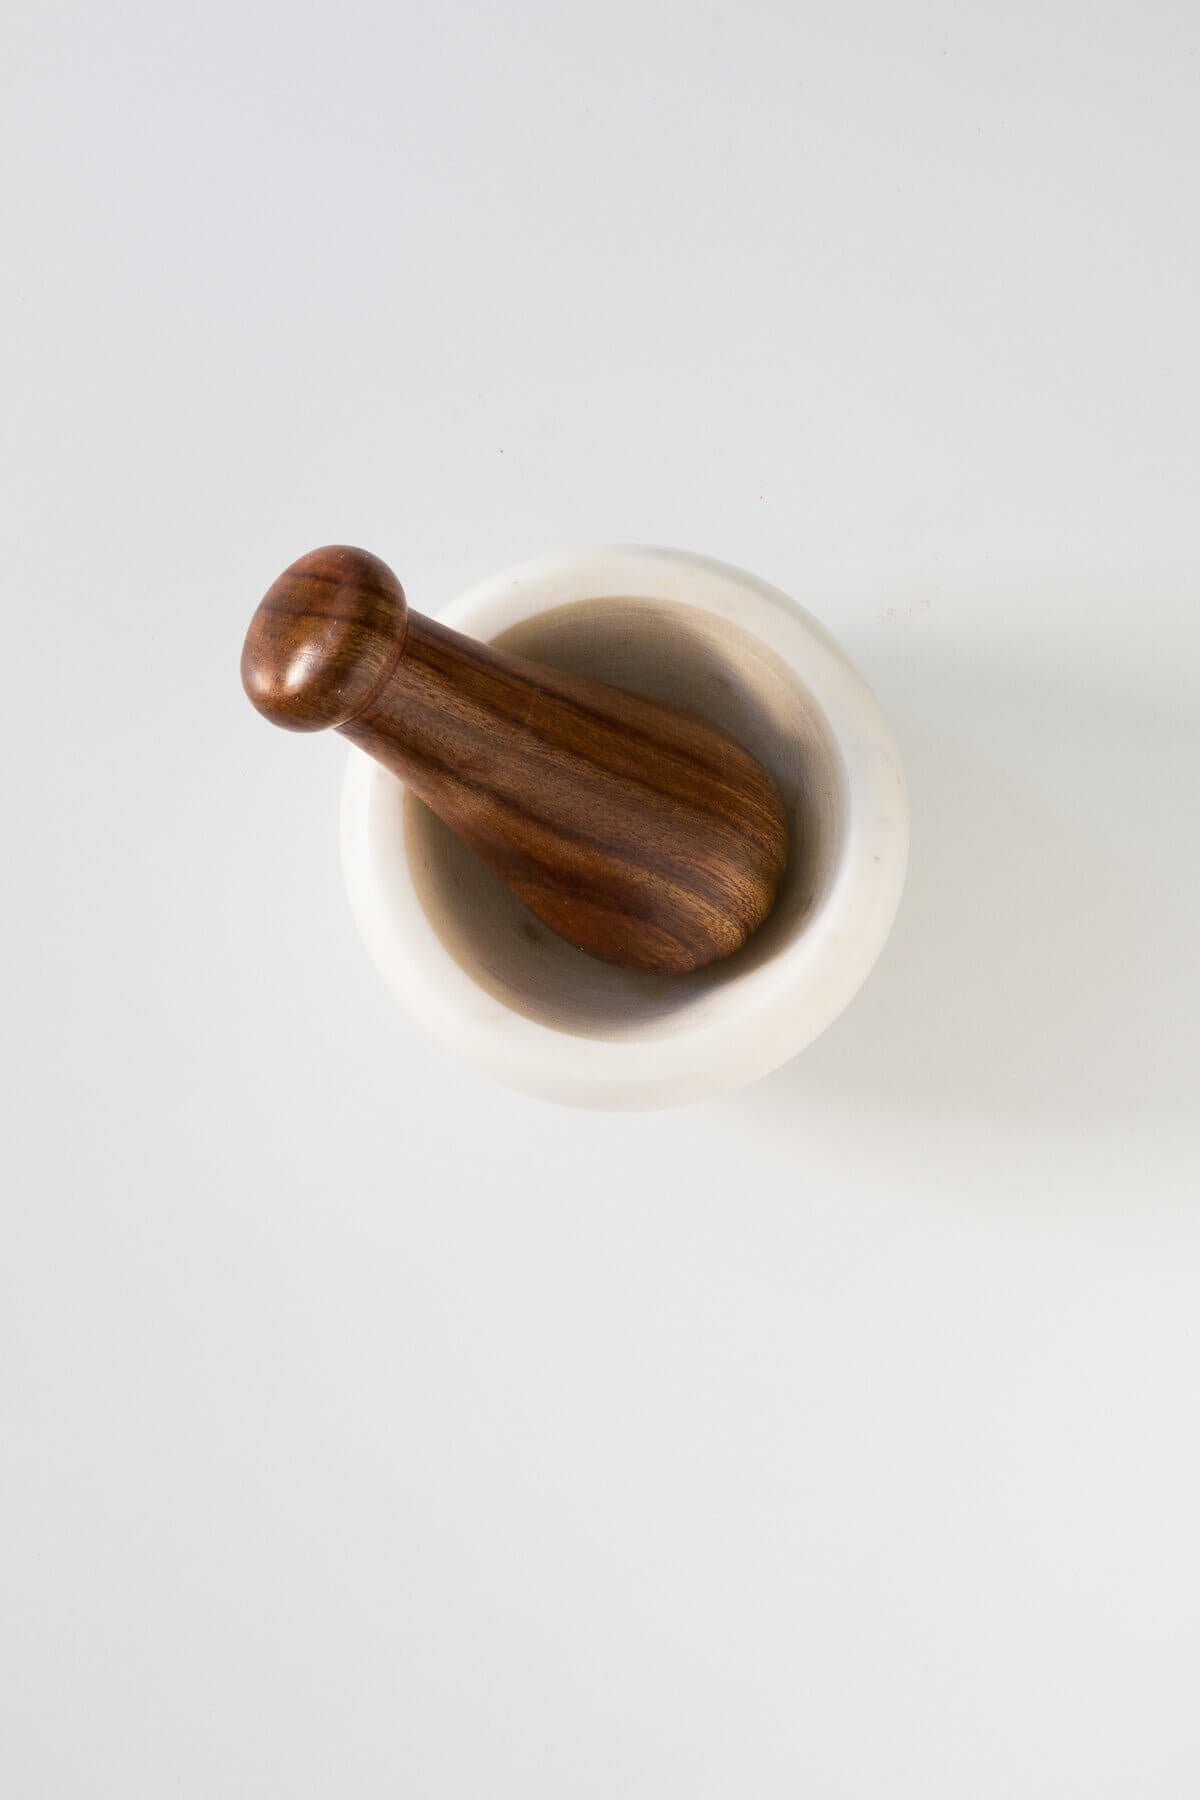 Be Home Marble + Wood Mortar and Pestle